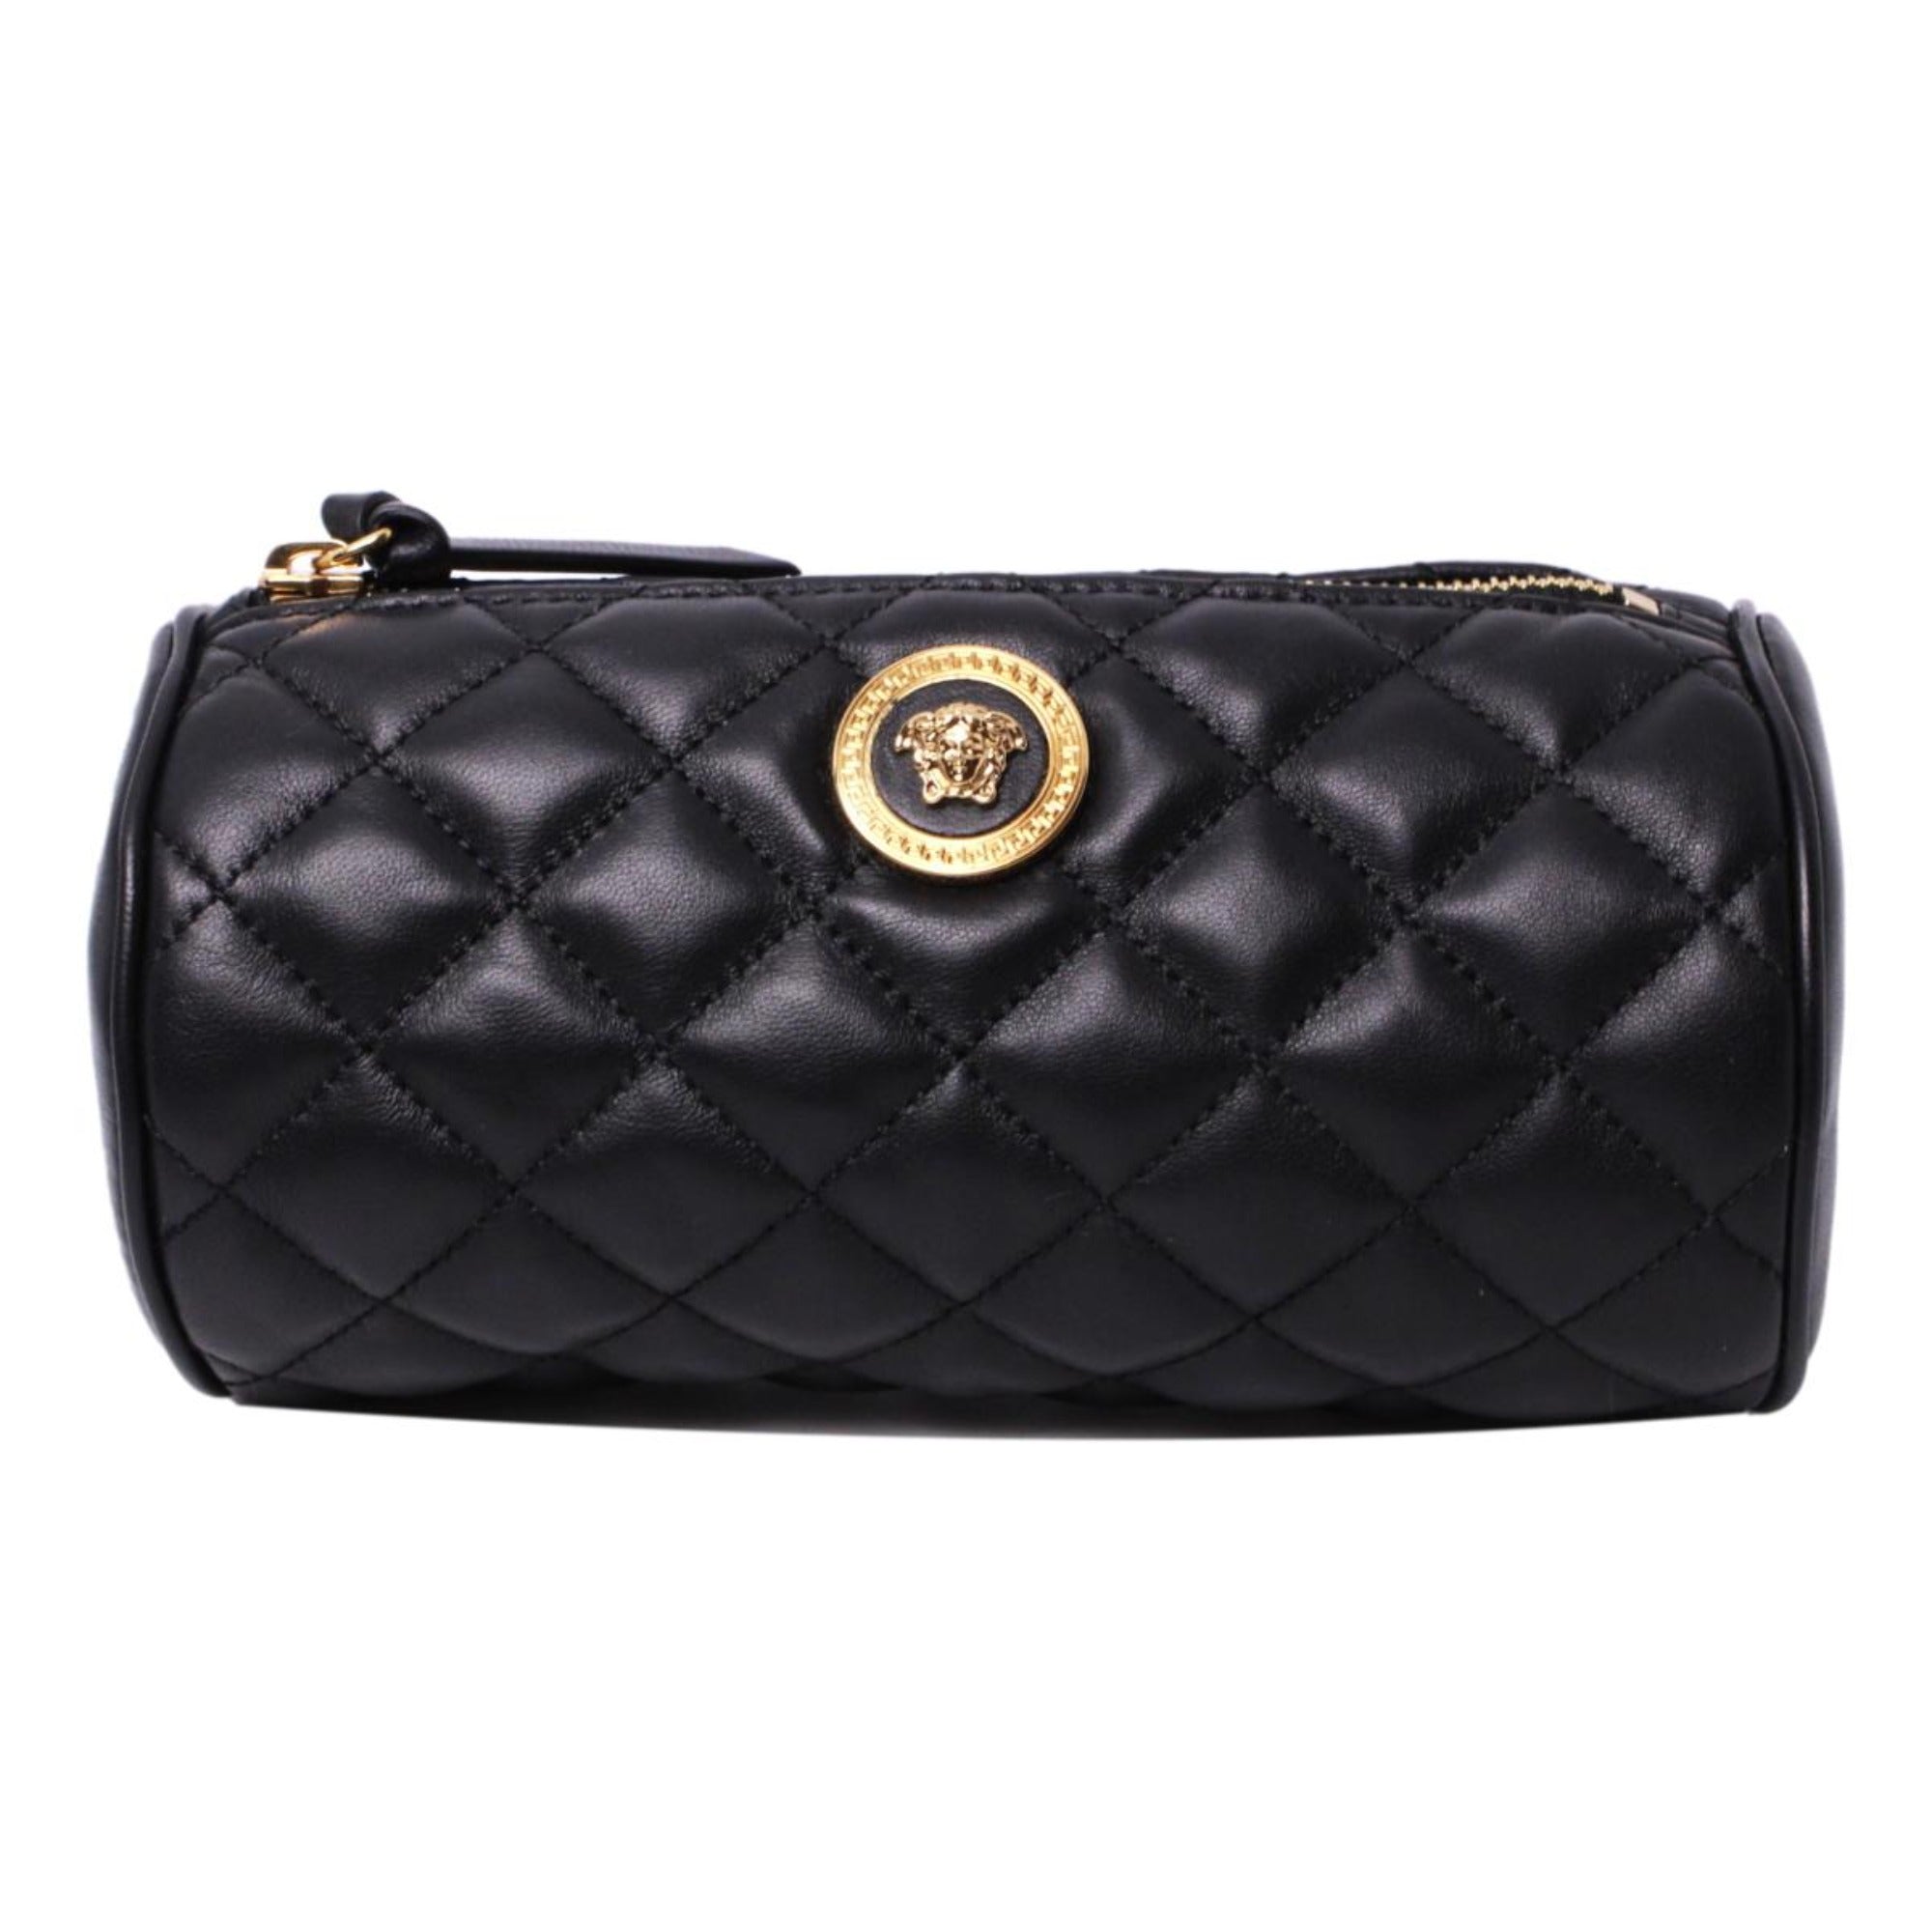 Versace Black Leather Medusa Quilted Cosmetic Bag DBFI160S at_Queen_Bee_of_Beverly_Hills